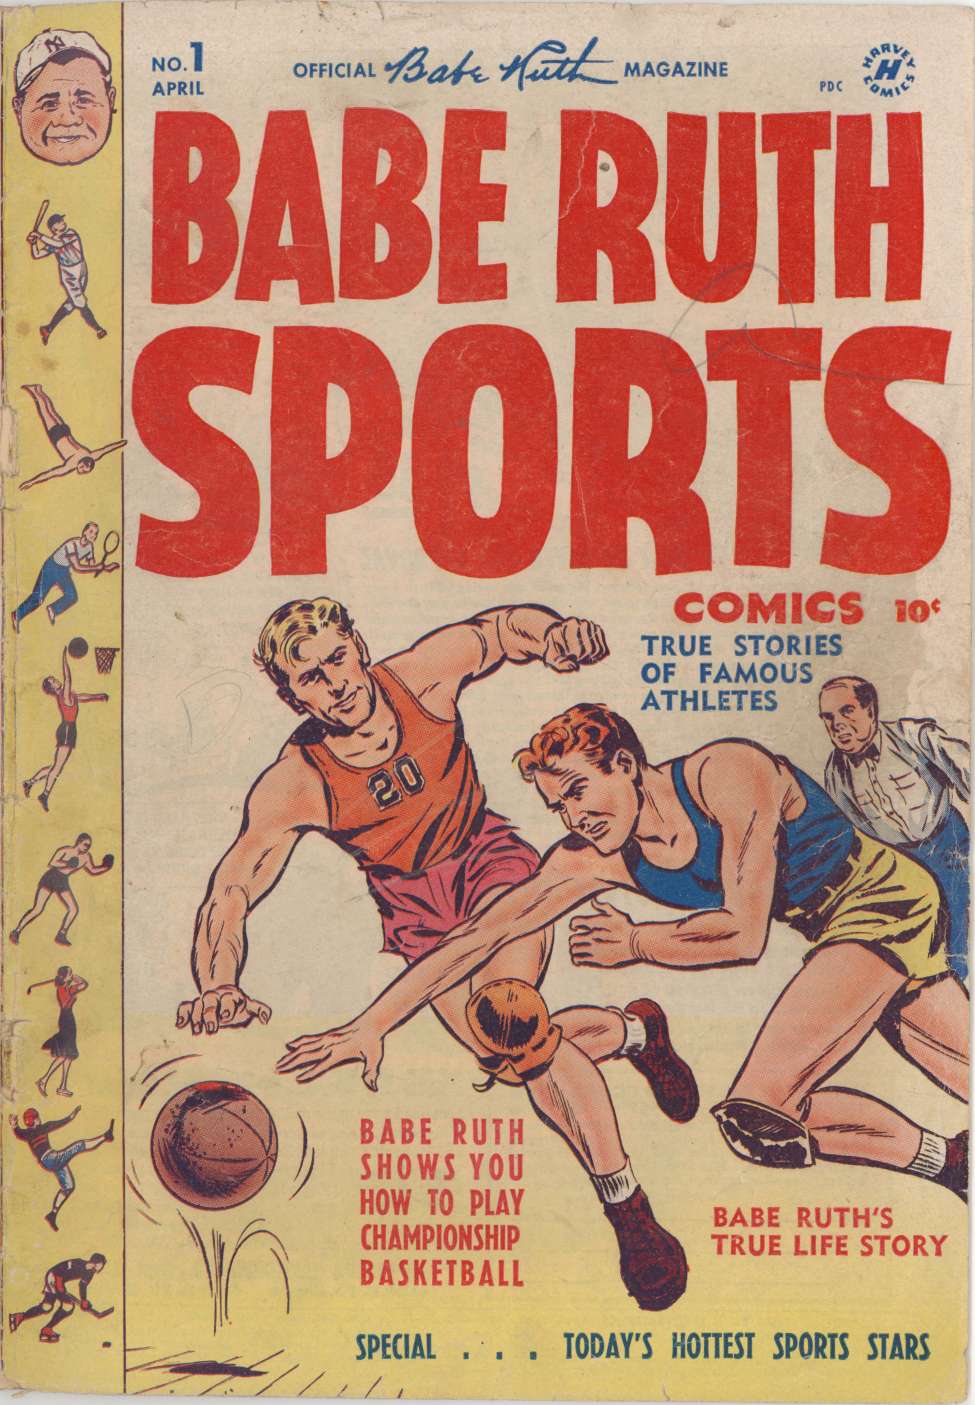 Book Cover For Babe Ruth Sports Comics 1 - Version 2